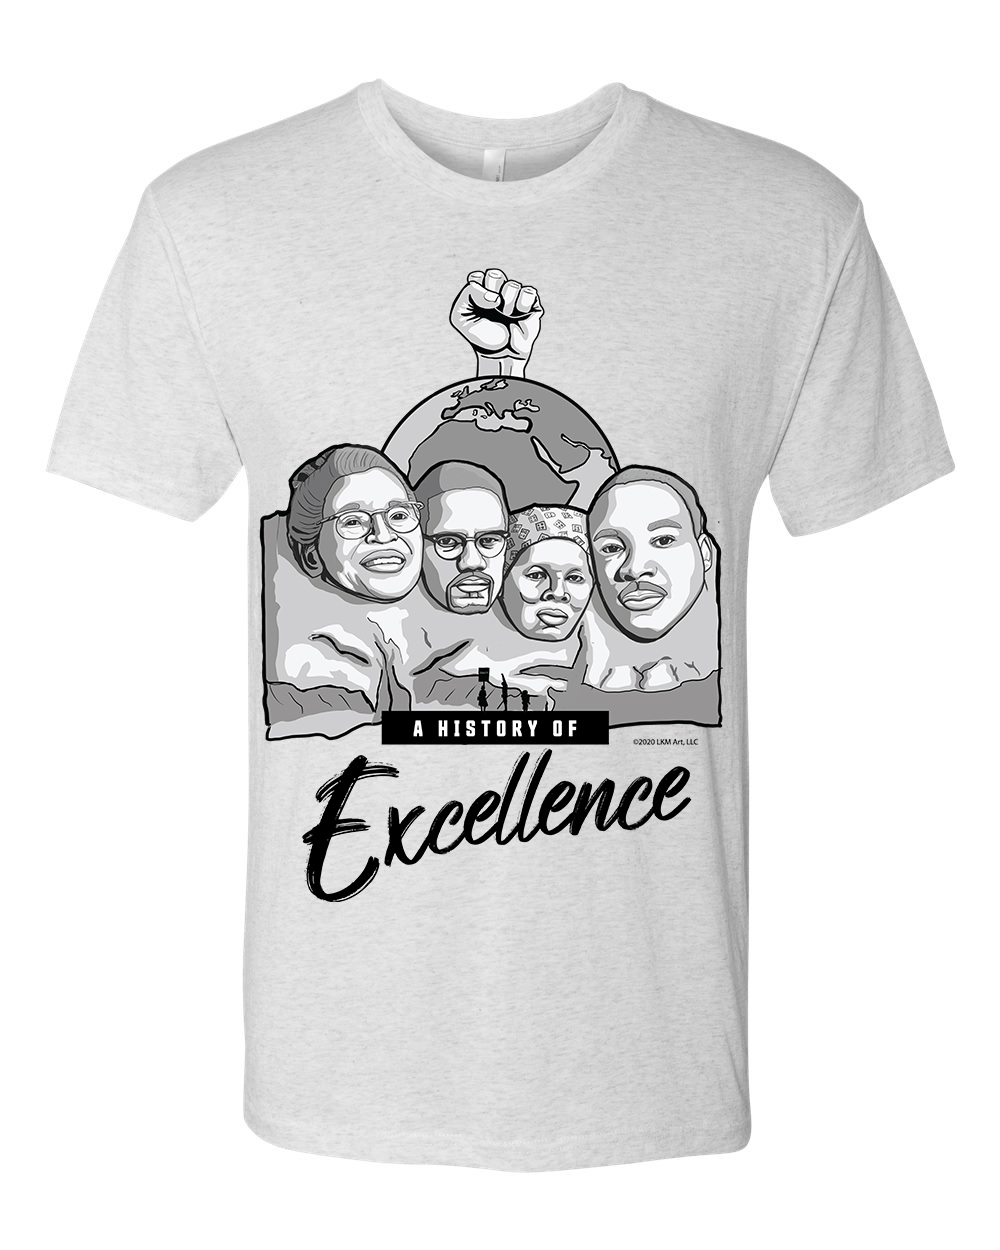 Mount Rushmore - Black Excellence (White)